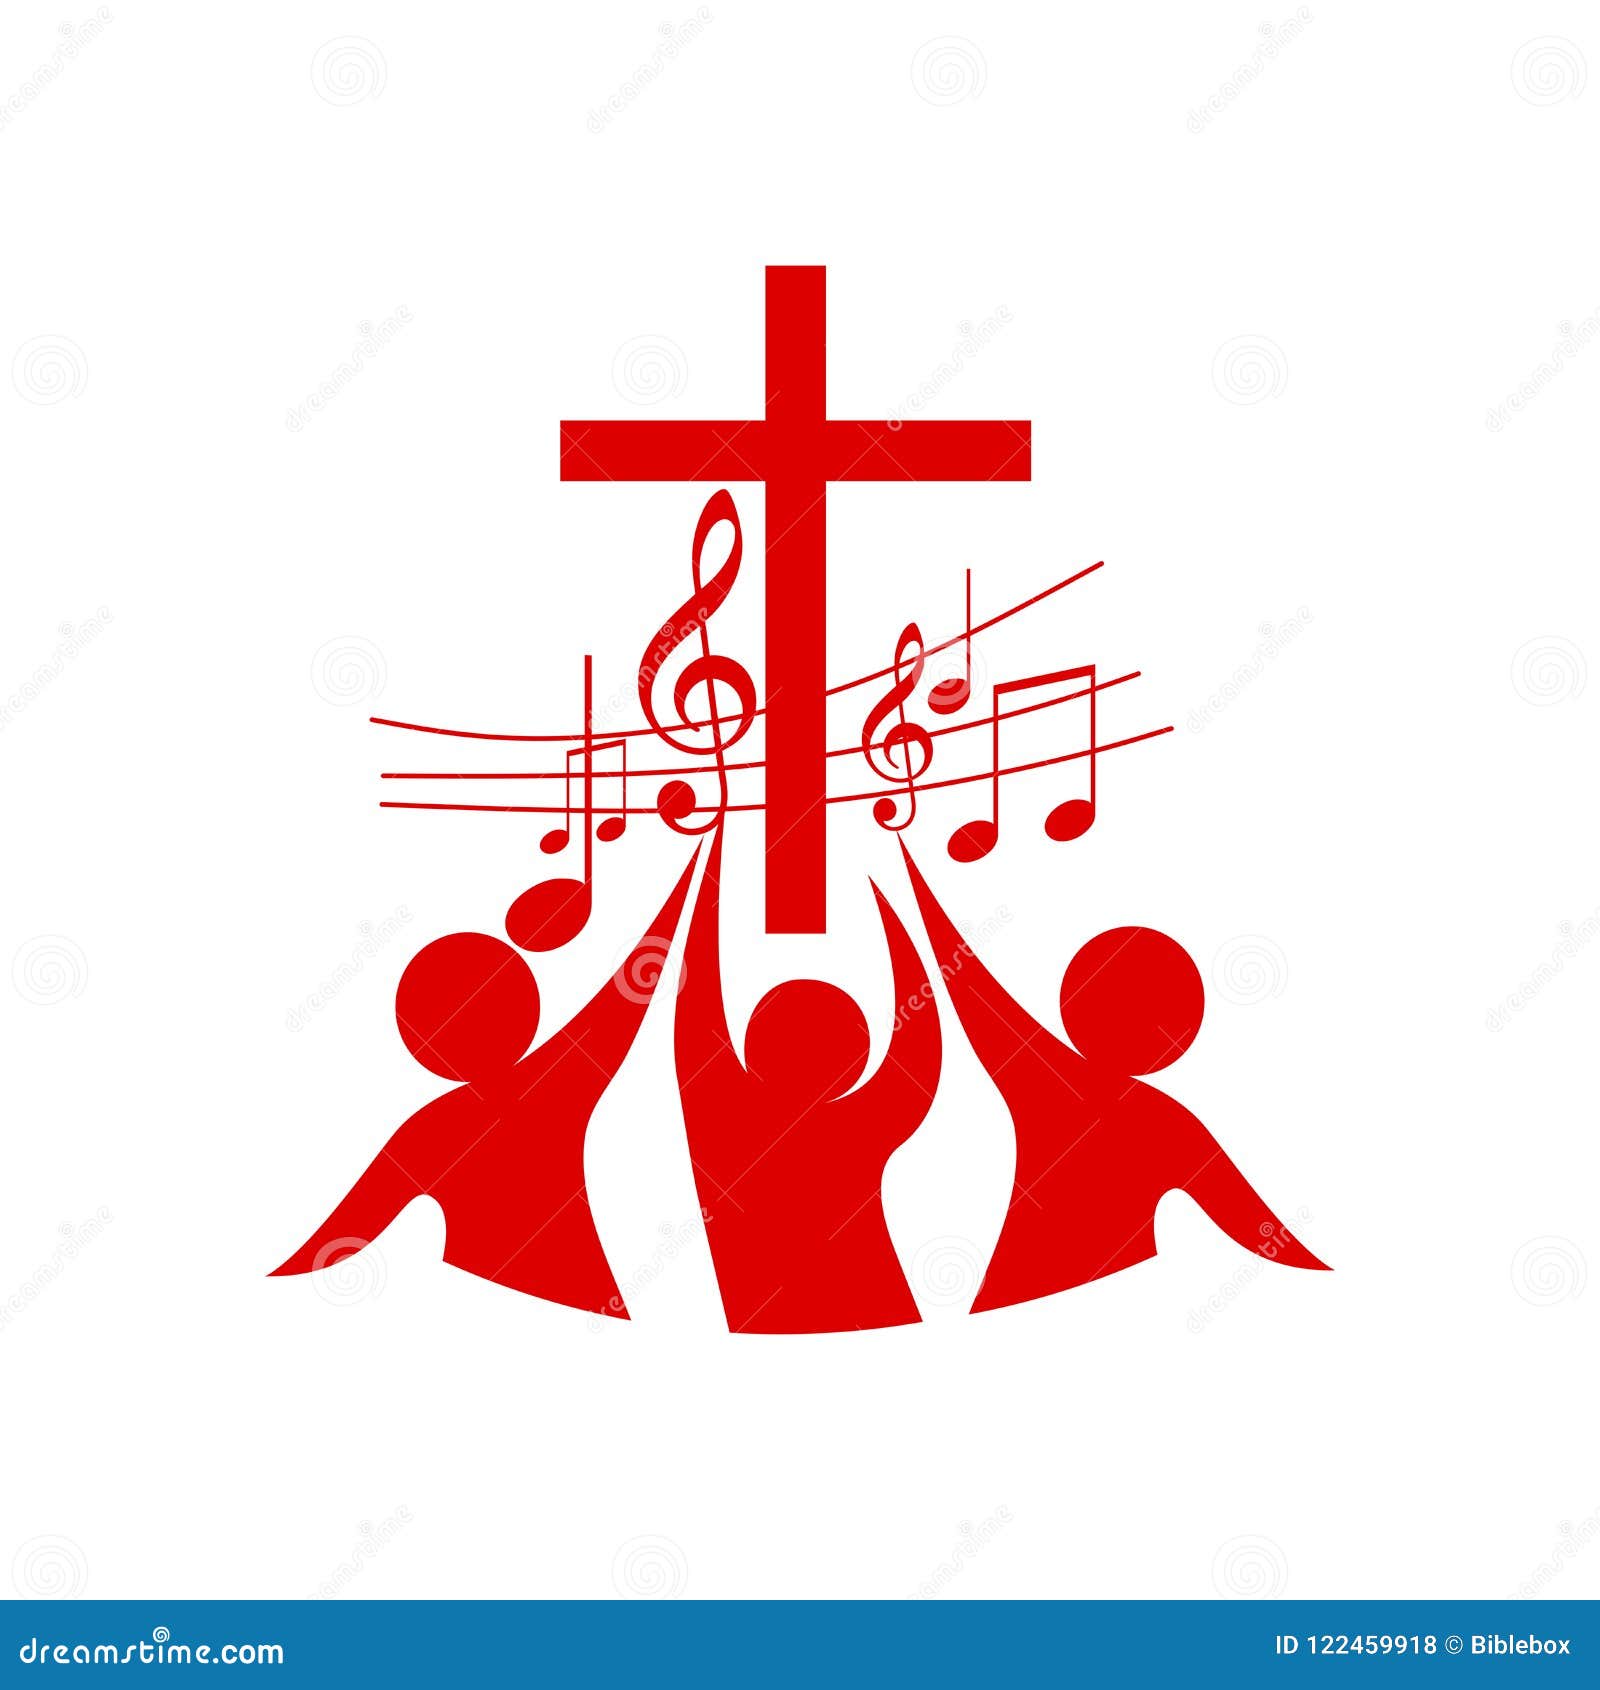 logo of the church and ministry. believers in the lord jesus christ worship the lord and sing to him glory and praise.